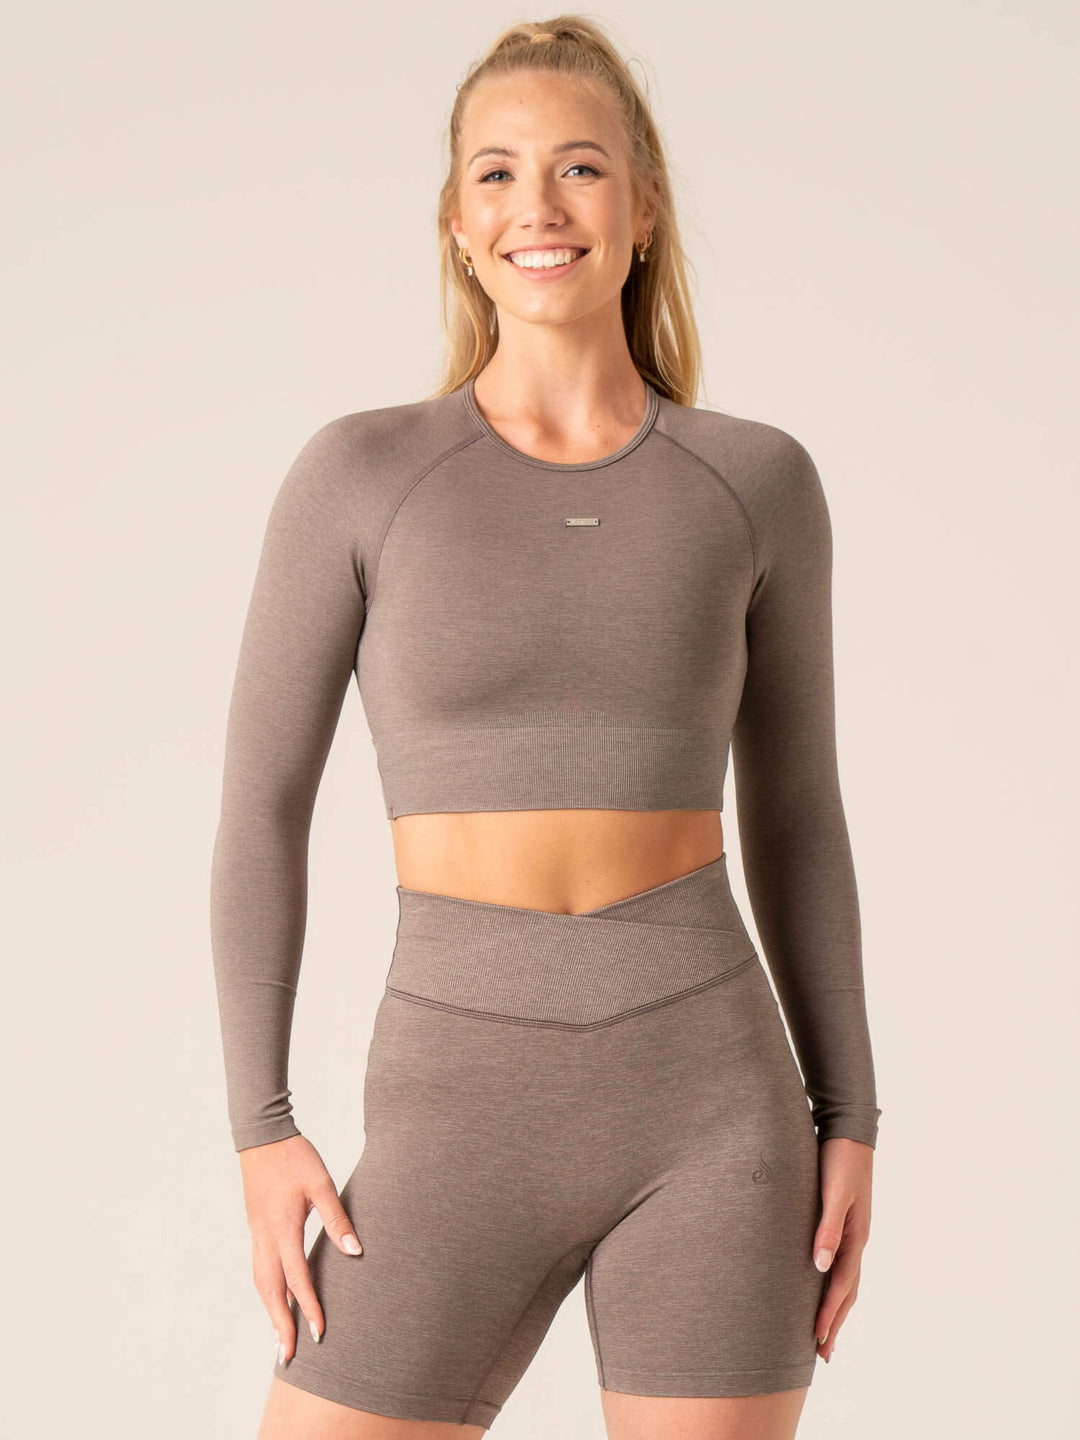 Focus Seamless Long Sleeve Top - Taupe Marl Clothing Ryderwear 